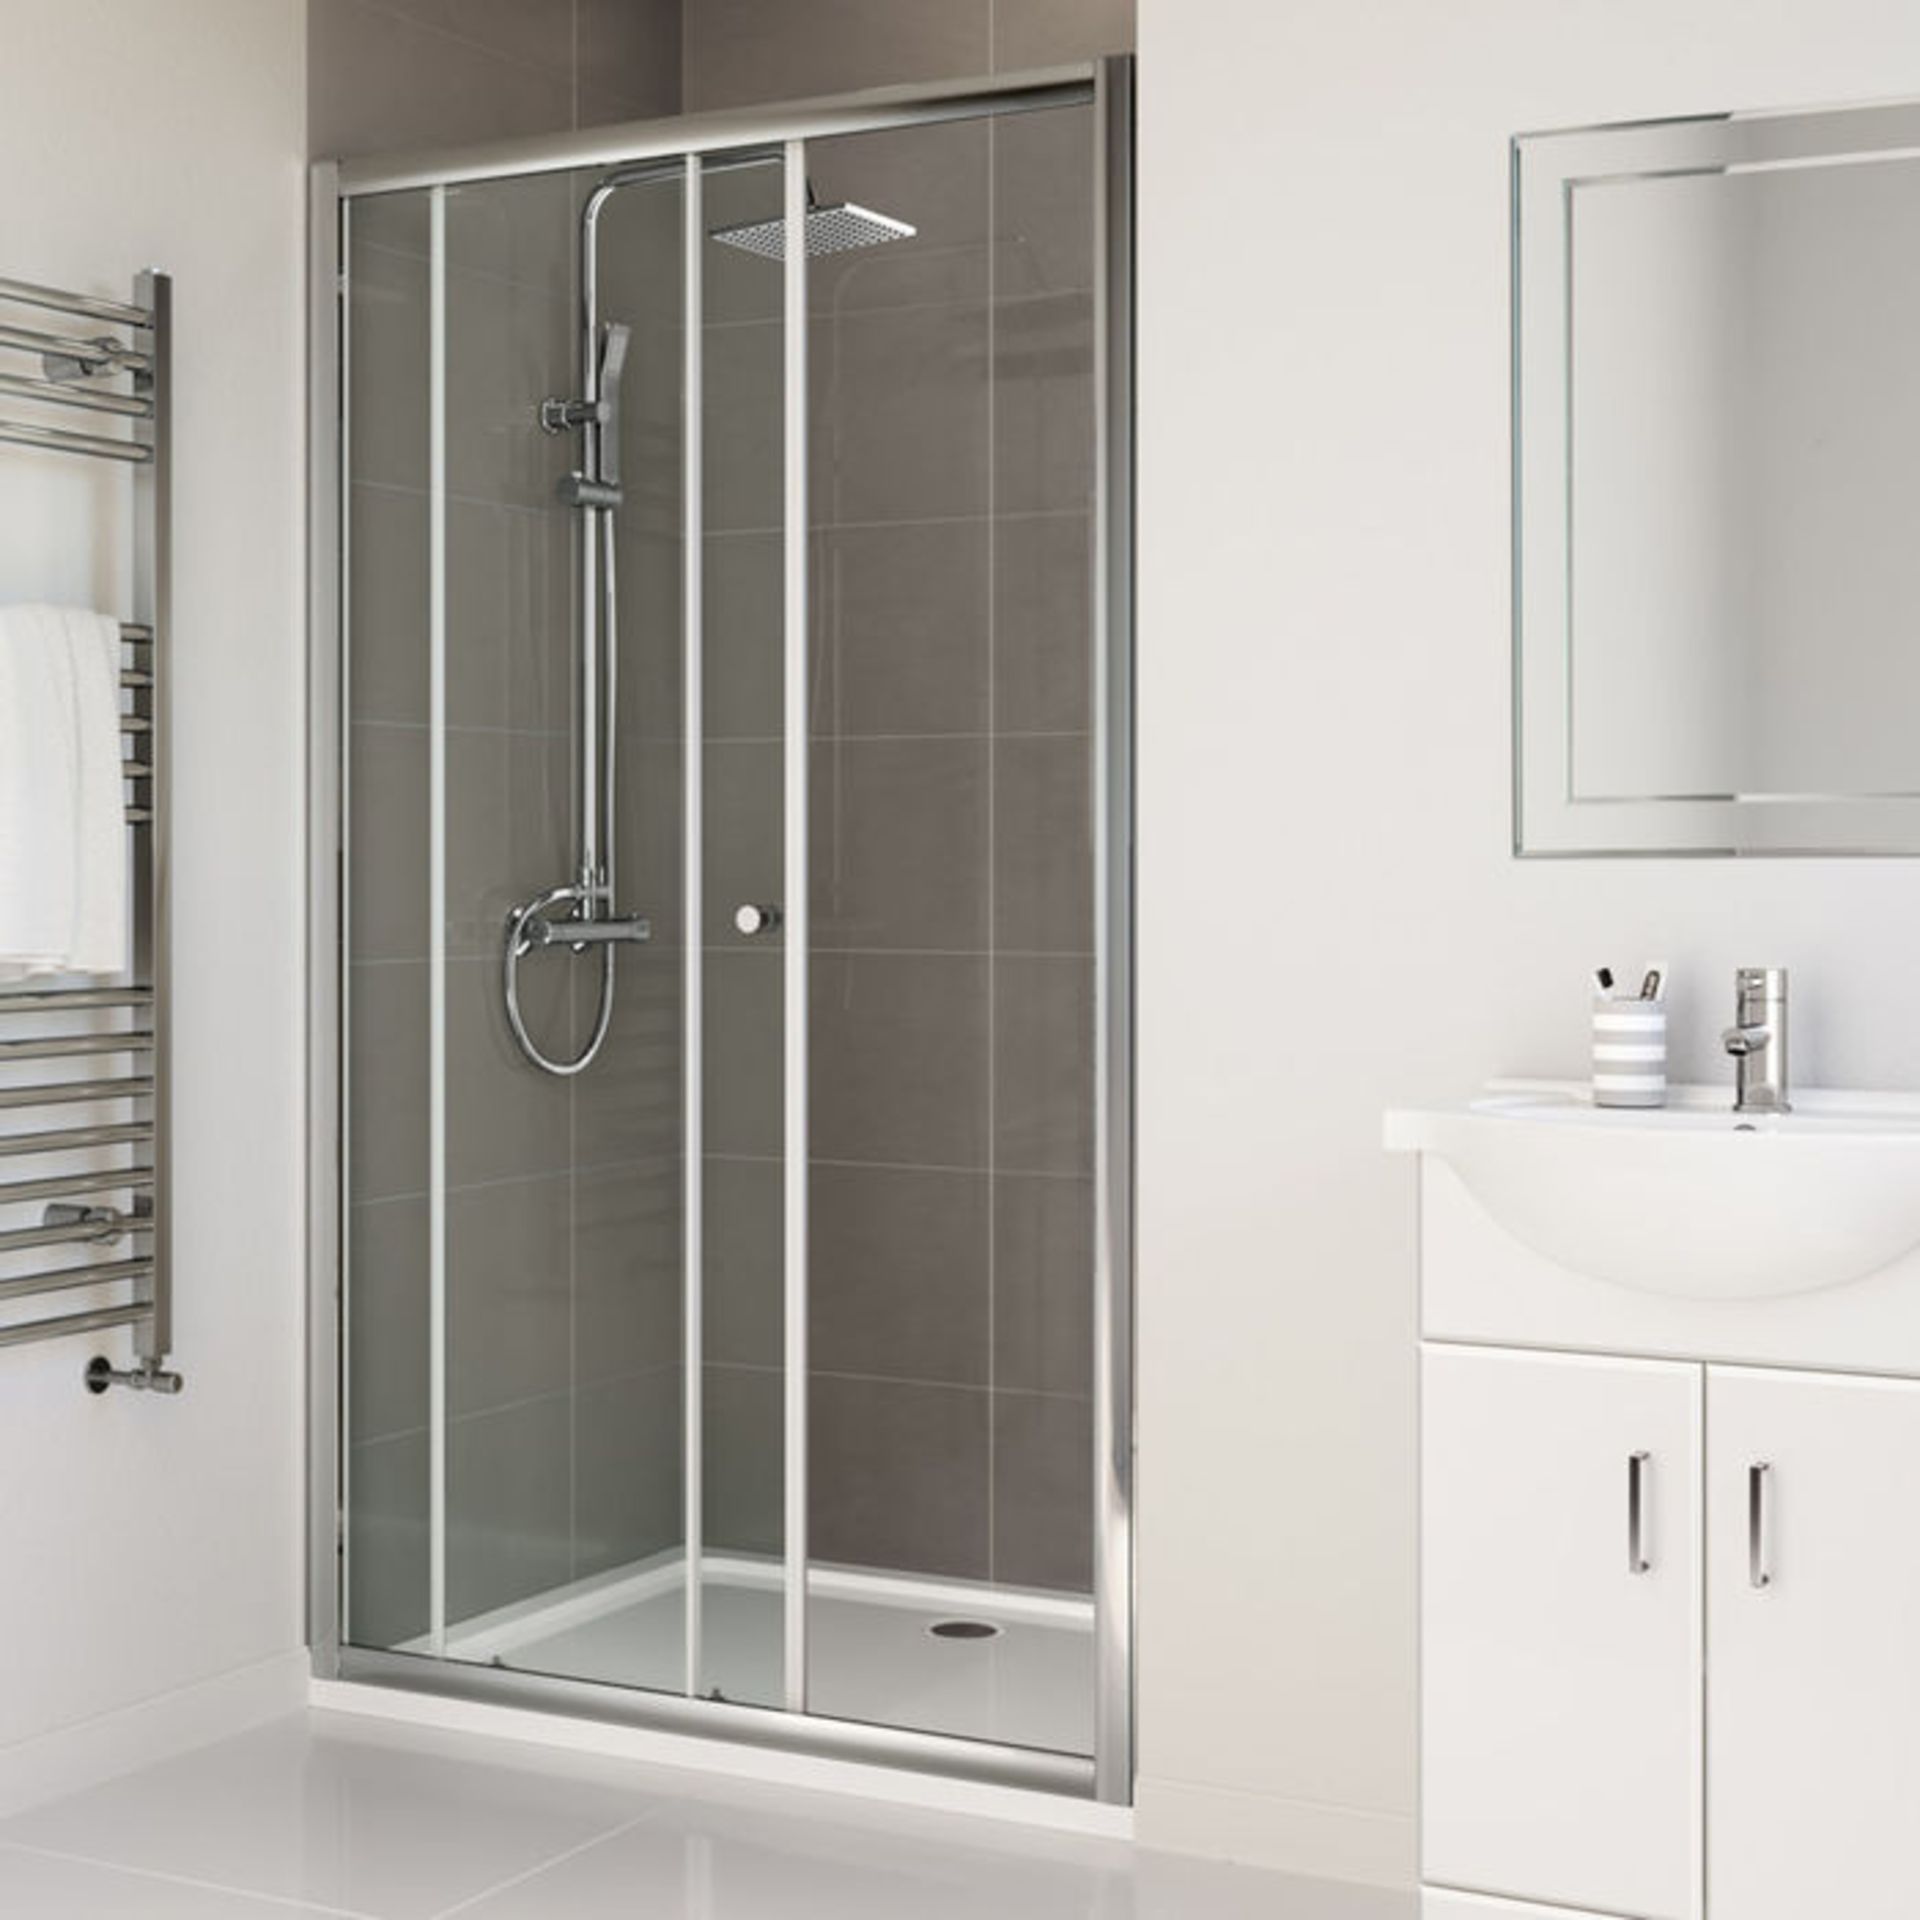 NEW Twyfords 1200mm - Elements Sliding Shower Door. RRP £399.99.4mm Safety Glass Fully waterp... - Image 2 of 3